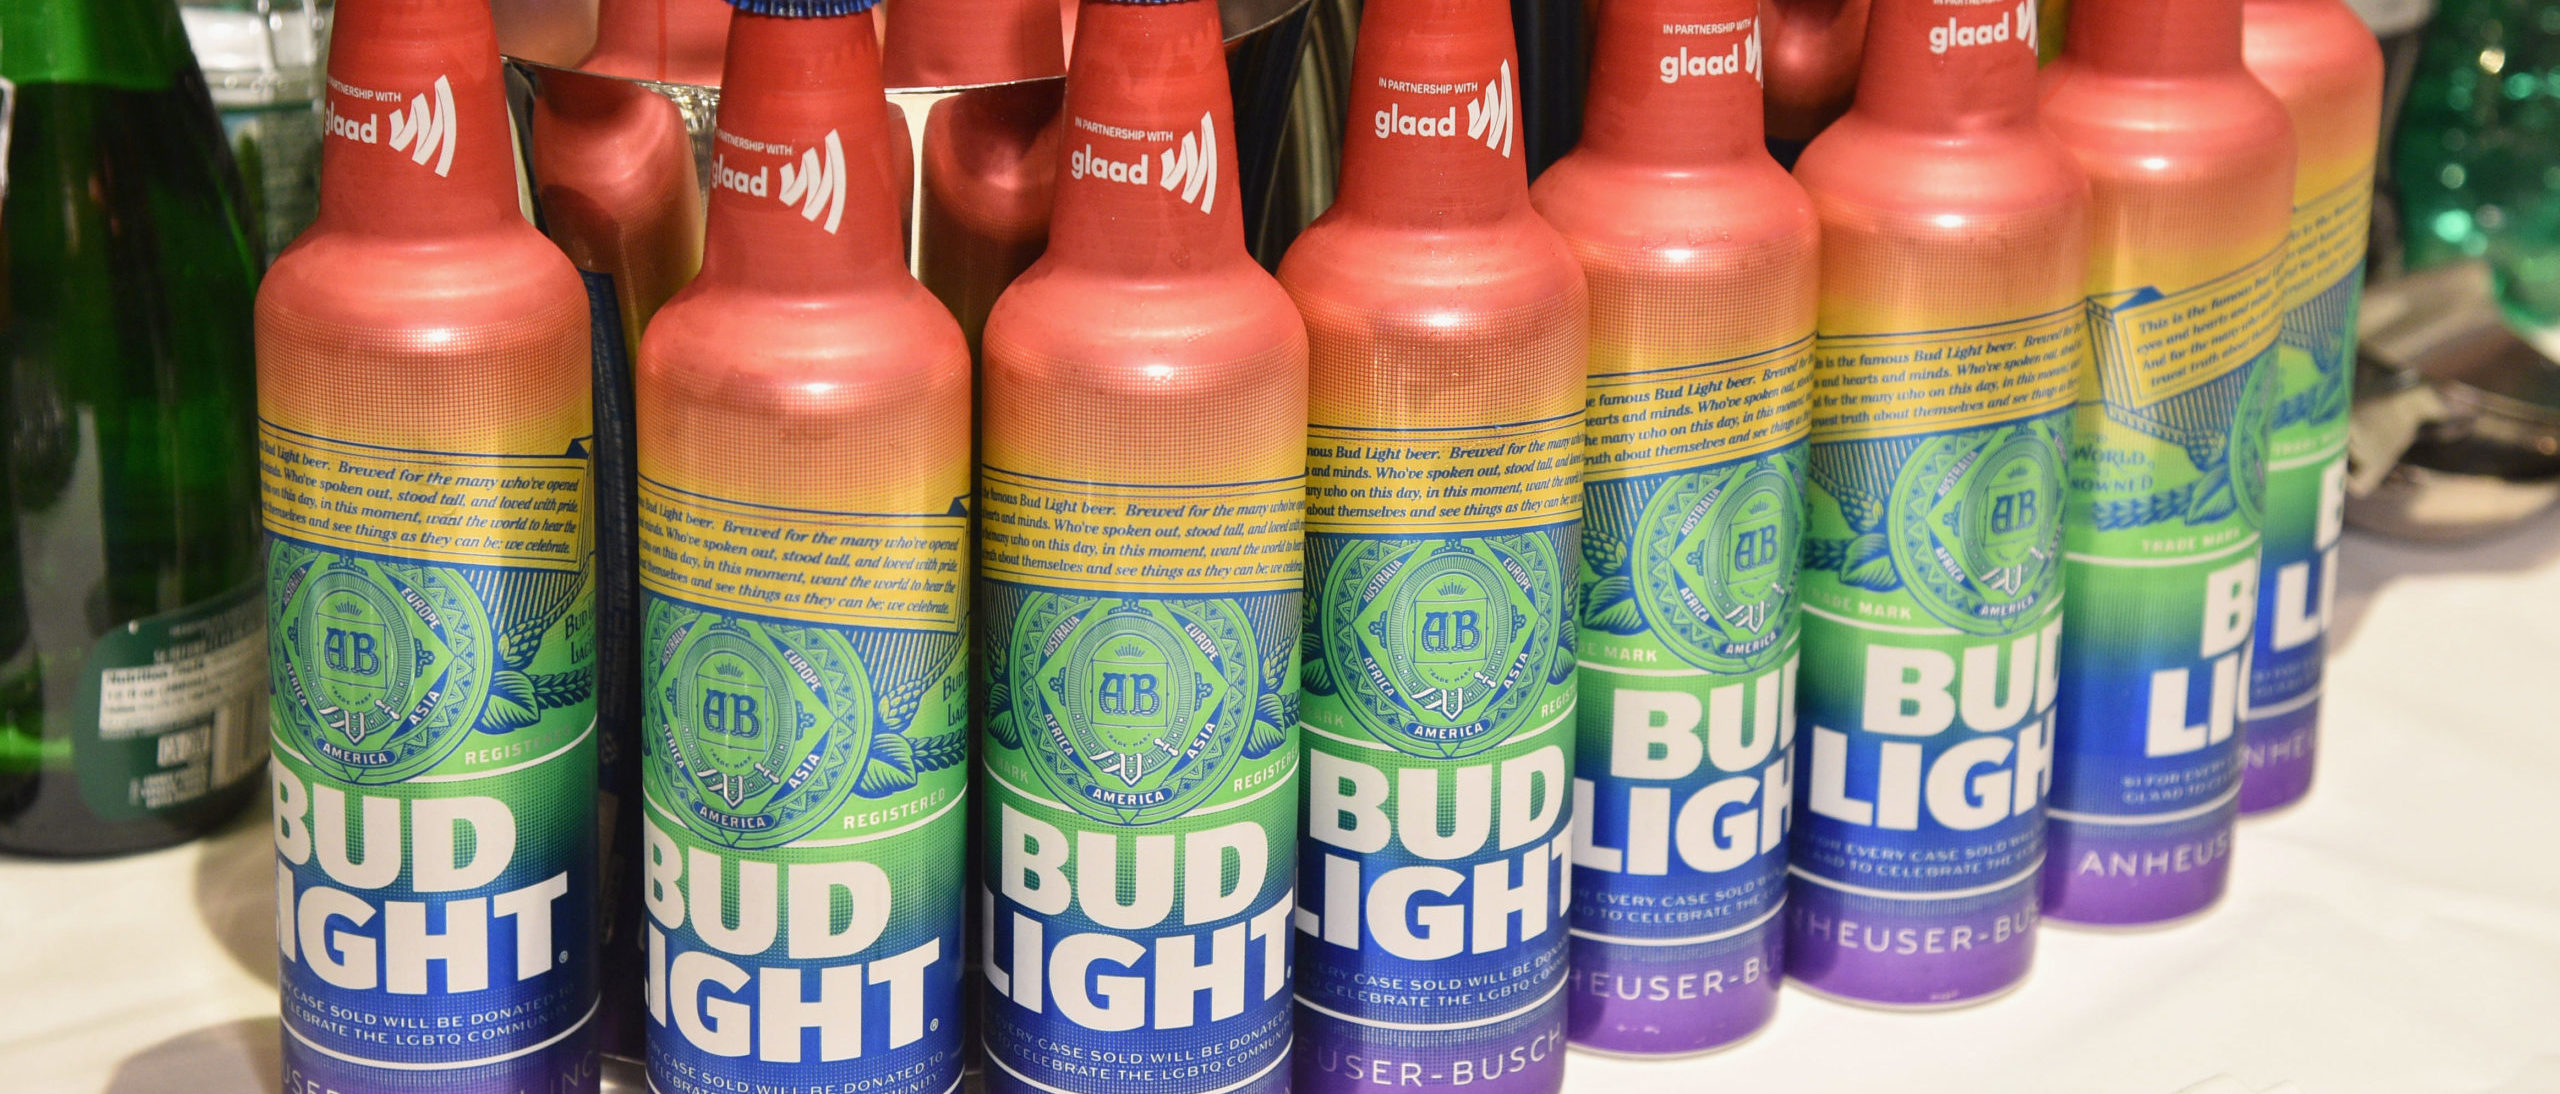 Bud Light is giving away subscriptions to NFL Sunday Ticket on